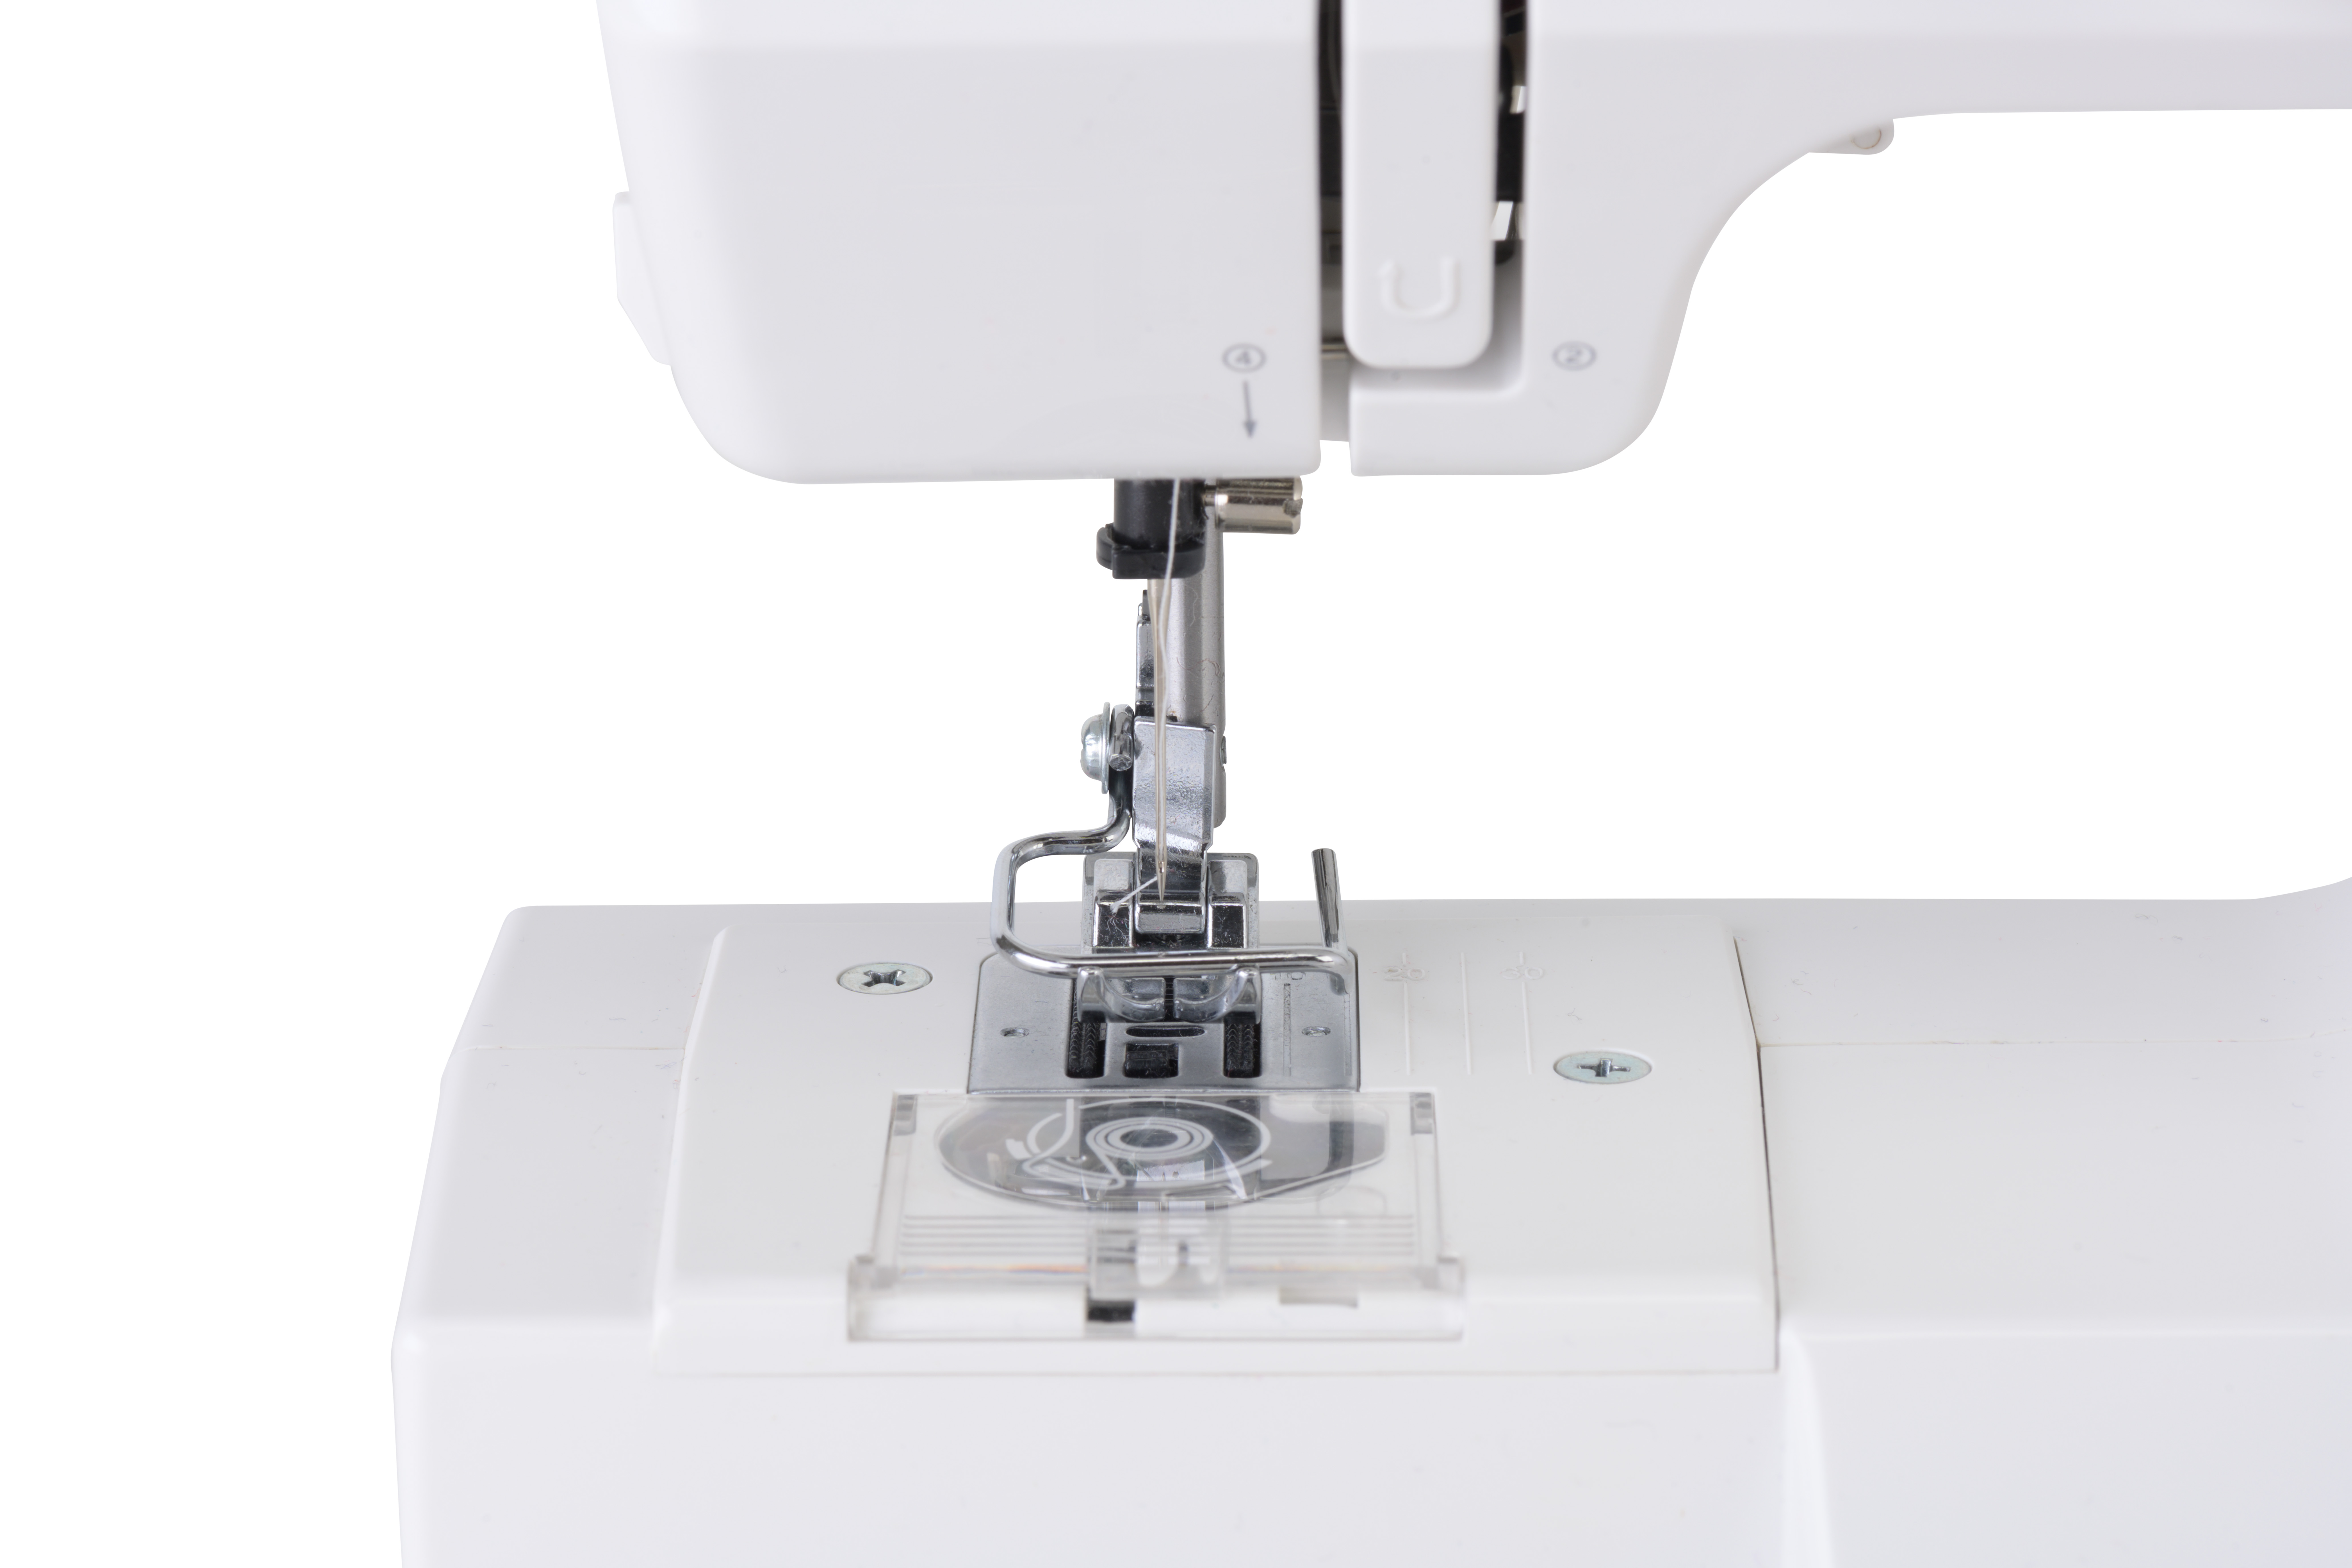 SINGER M1000 Mending Sewing Machine - Simple, Portable, Great for Beginners, Mending & Light Sewing - image 5 of 6